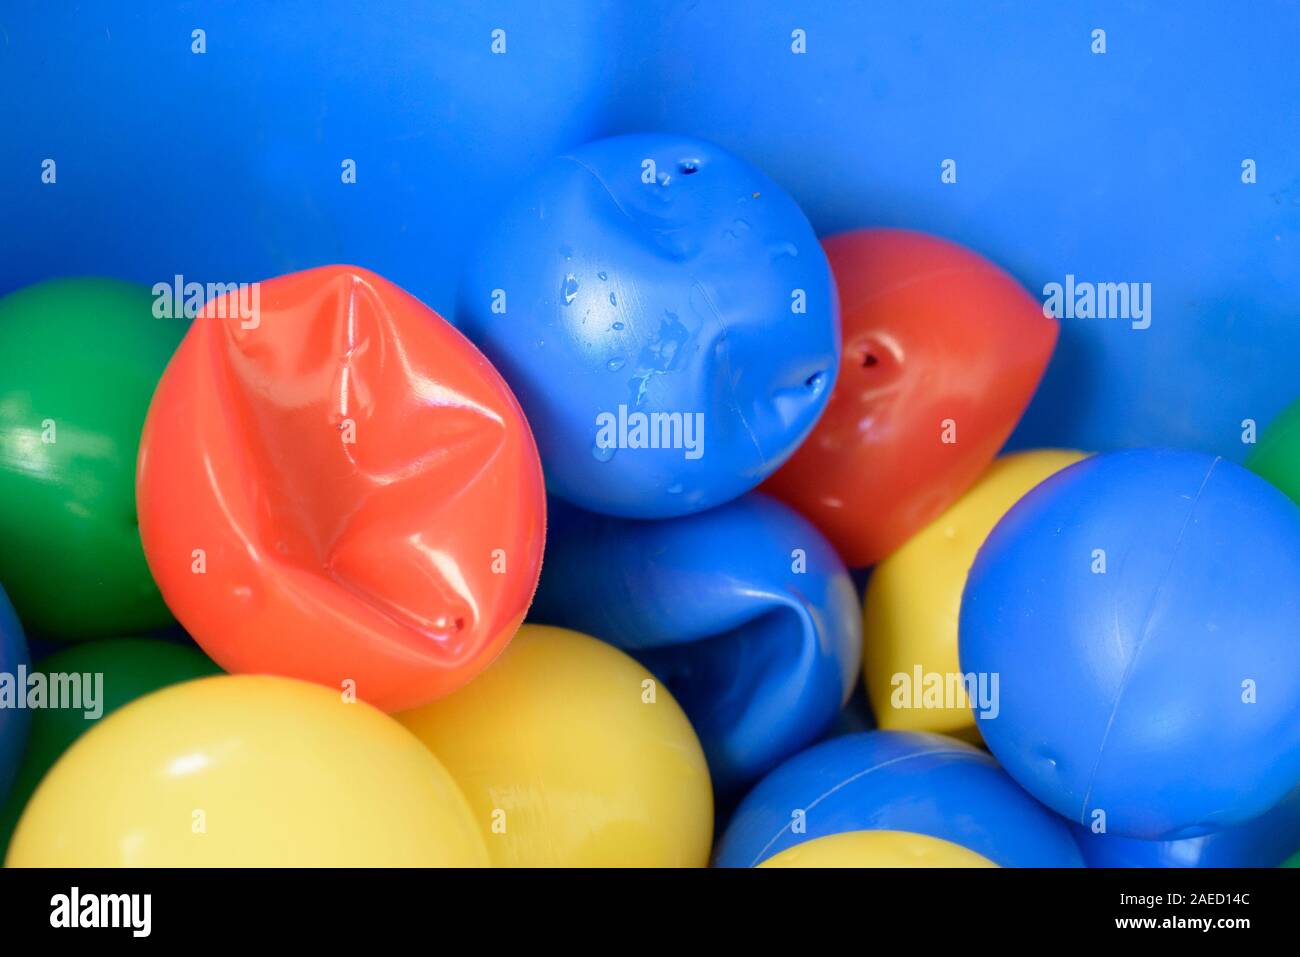 Cheap easily damaged colorful hollow plastic balls with holes for ball pit  Stock Photo - Alamy